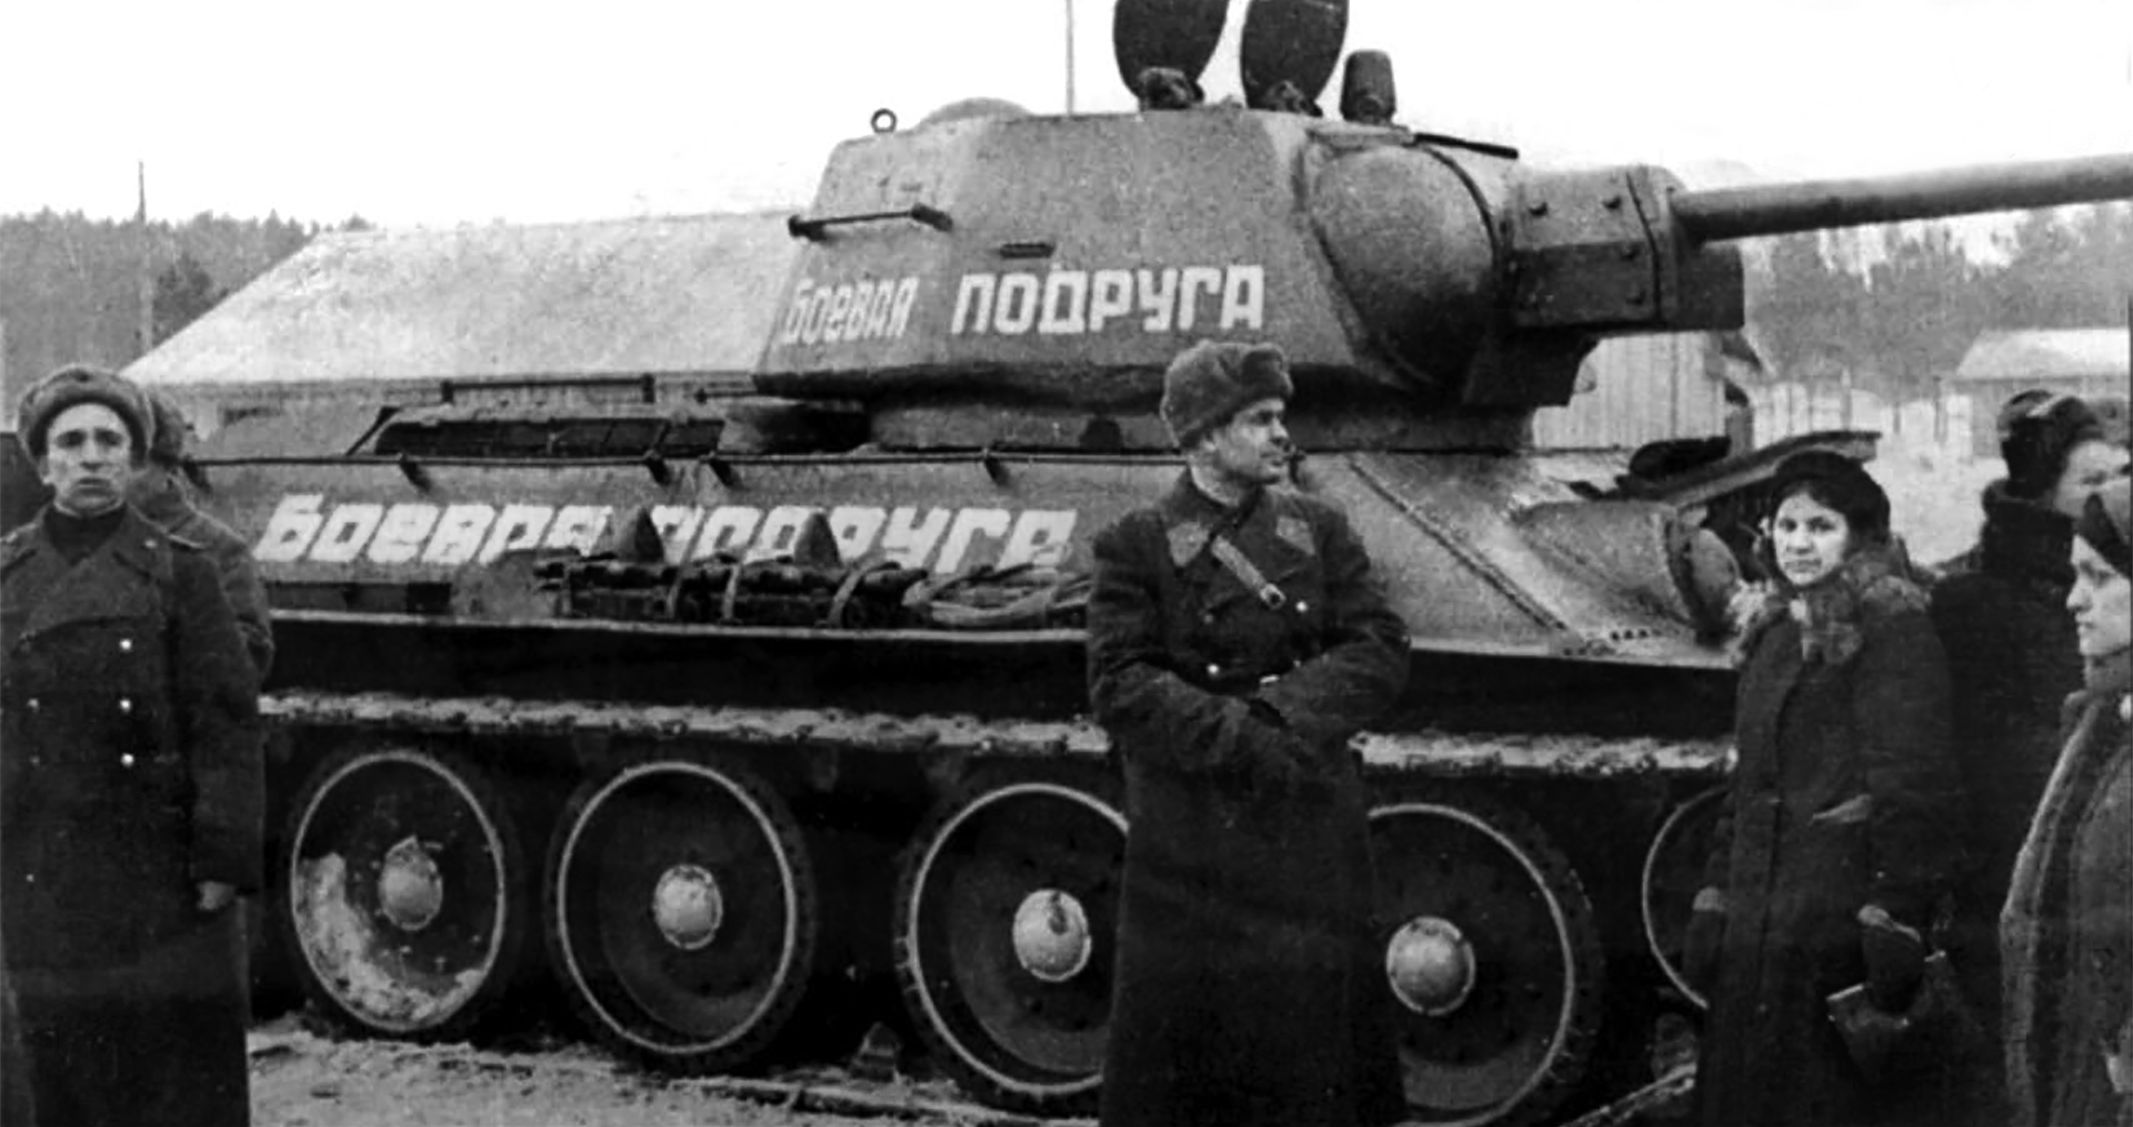 The “Fighting Girlfriend” at the moment of its transfer to the crew by the team of the Sverdlovsk bread and pasta plant. The tank was built at the expense of the plant's mostly female workers.